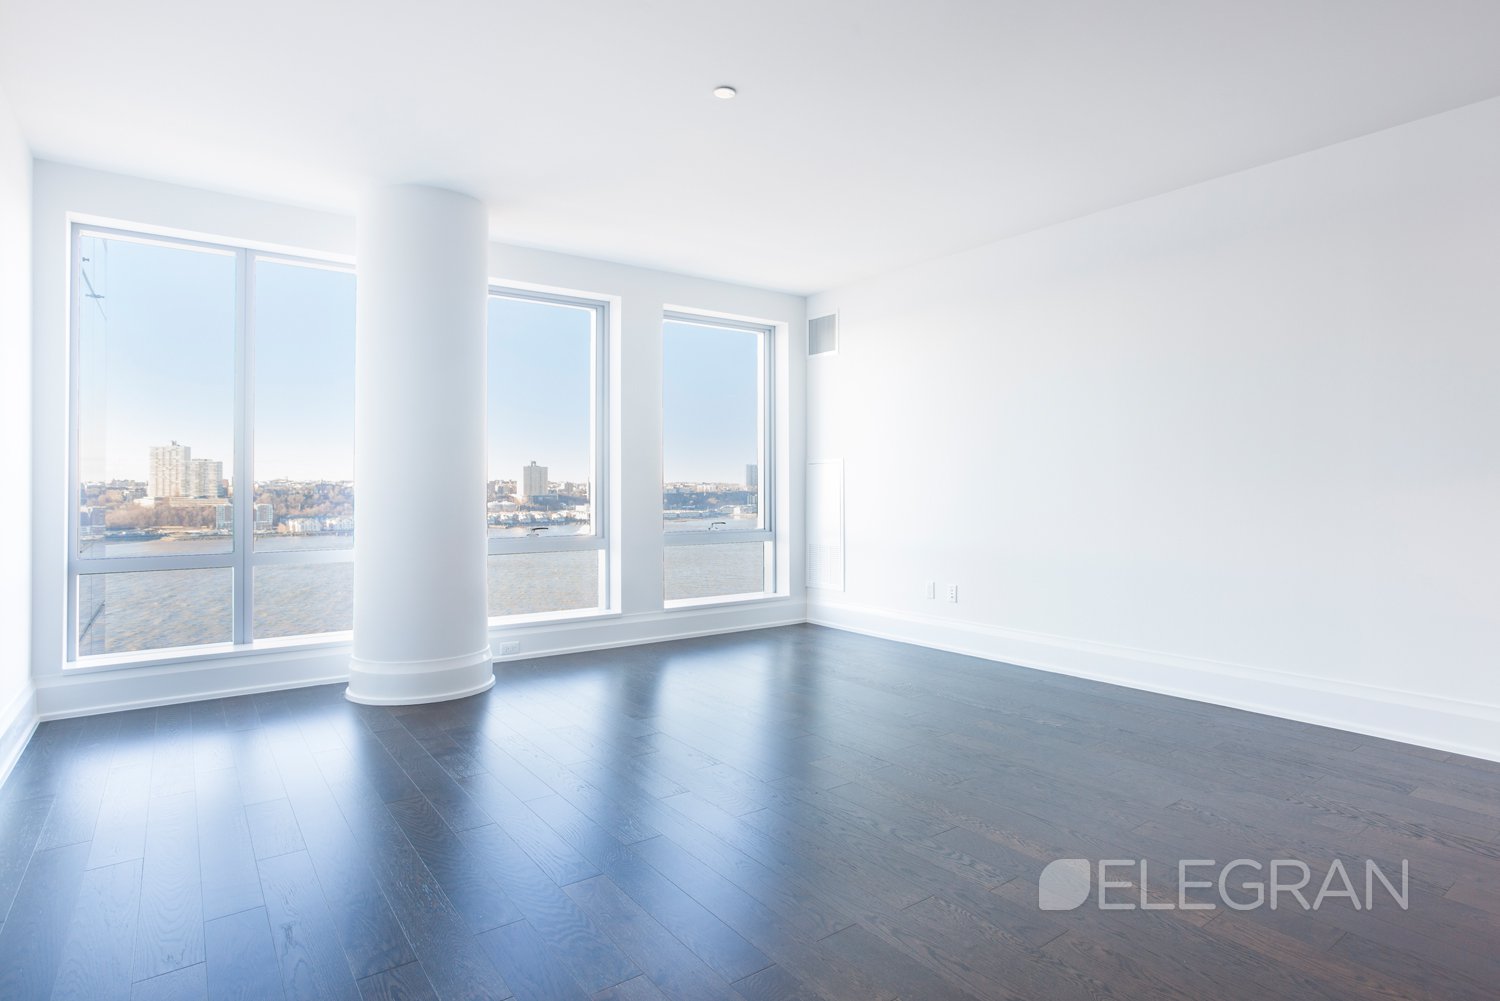 50 Riverside Boulevard 20-D, Lincoln Square, Upper West Side, NYC - 2 Bedrooms  
2.5 Bathrooms  
4 Rooms - 